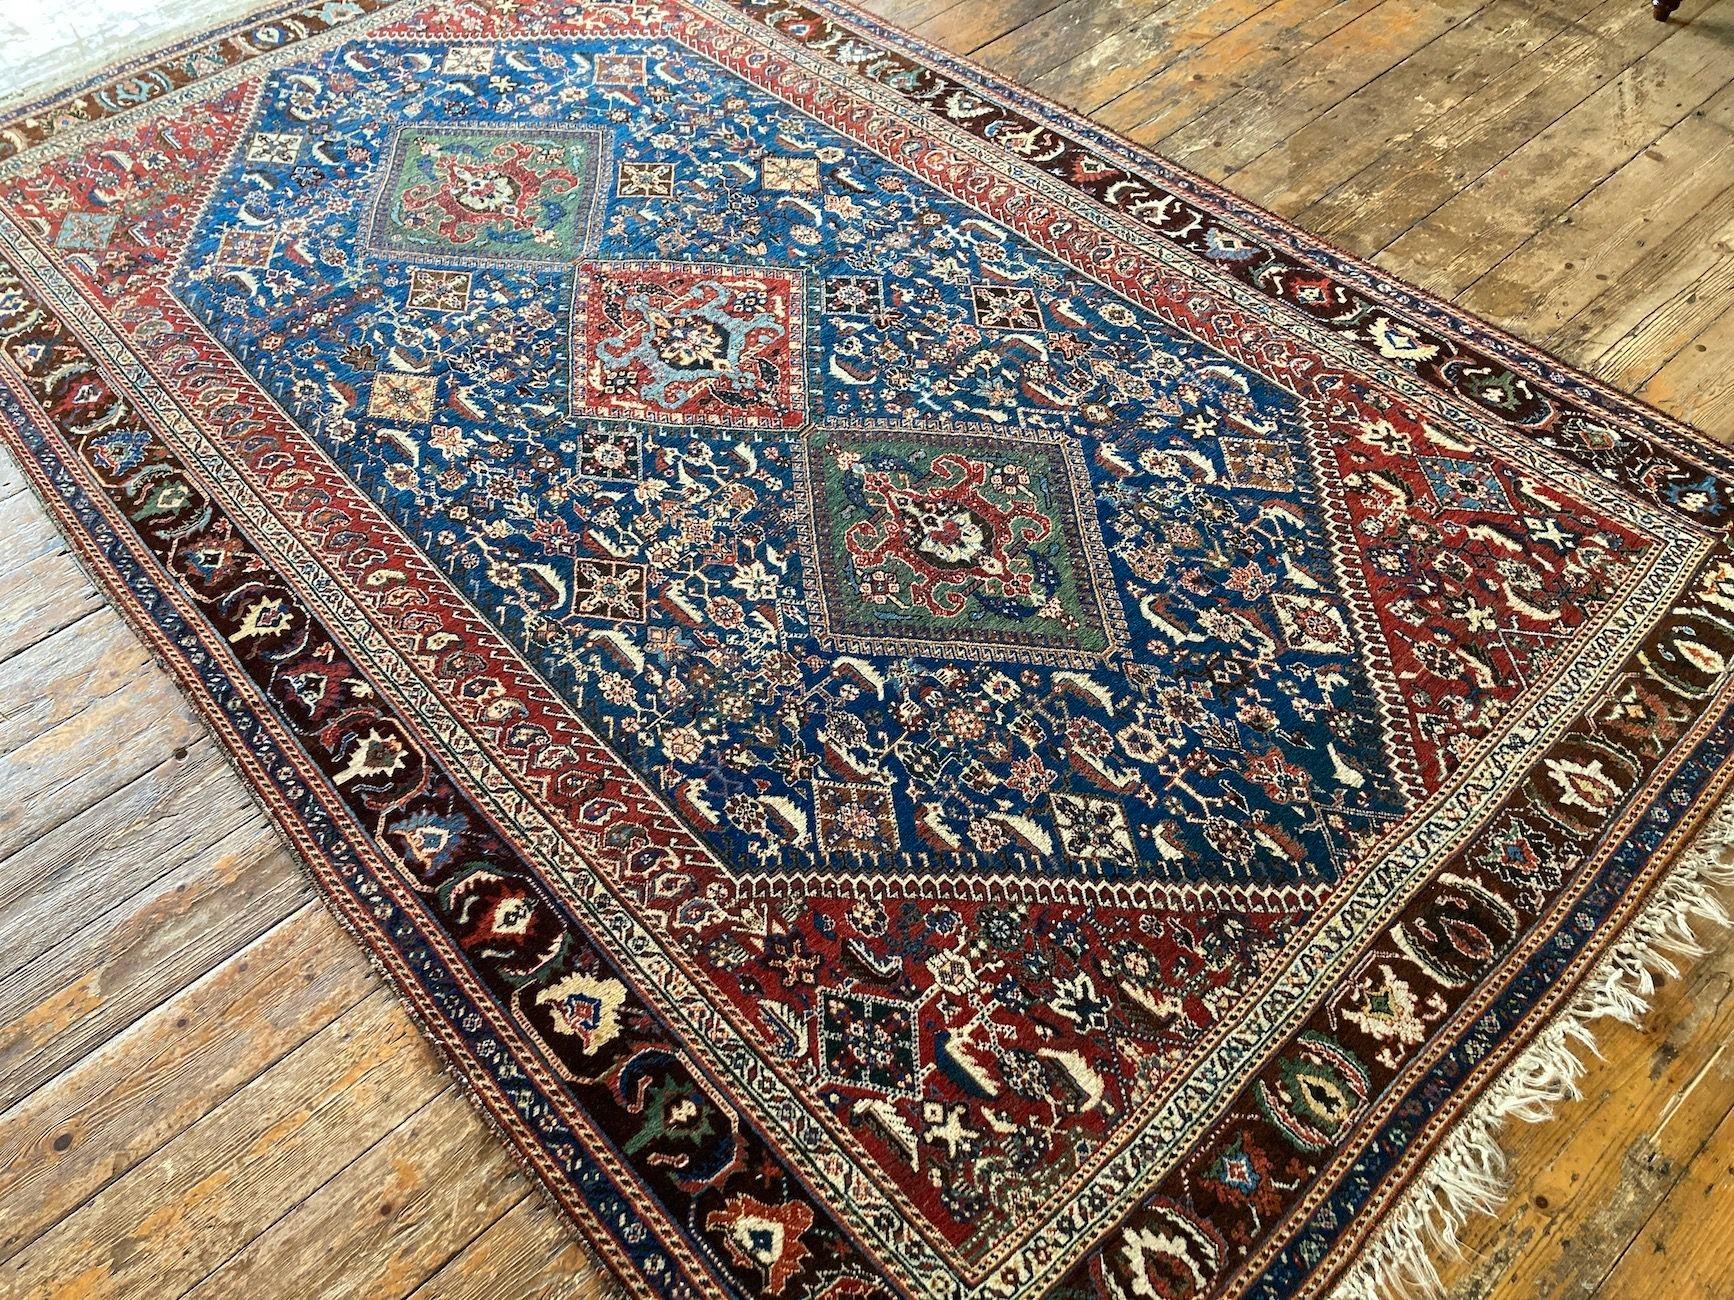 Early 20th Century Antique Qashqai Rug 2.62m X 1.57m For Sale